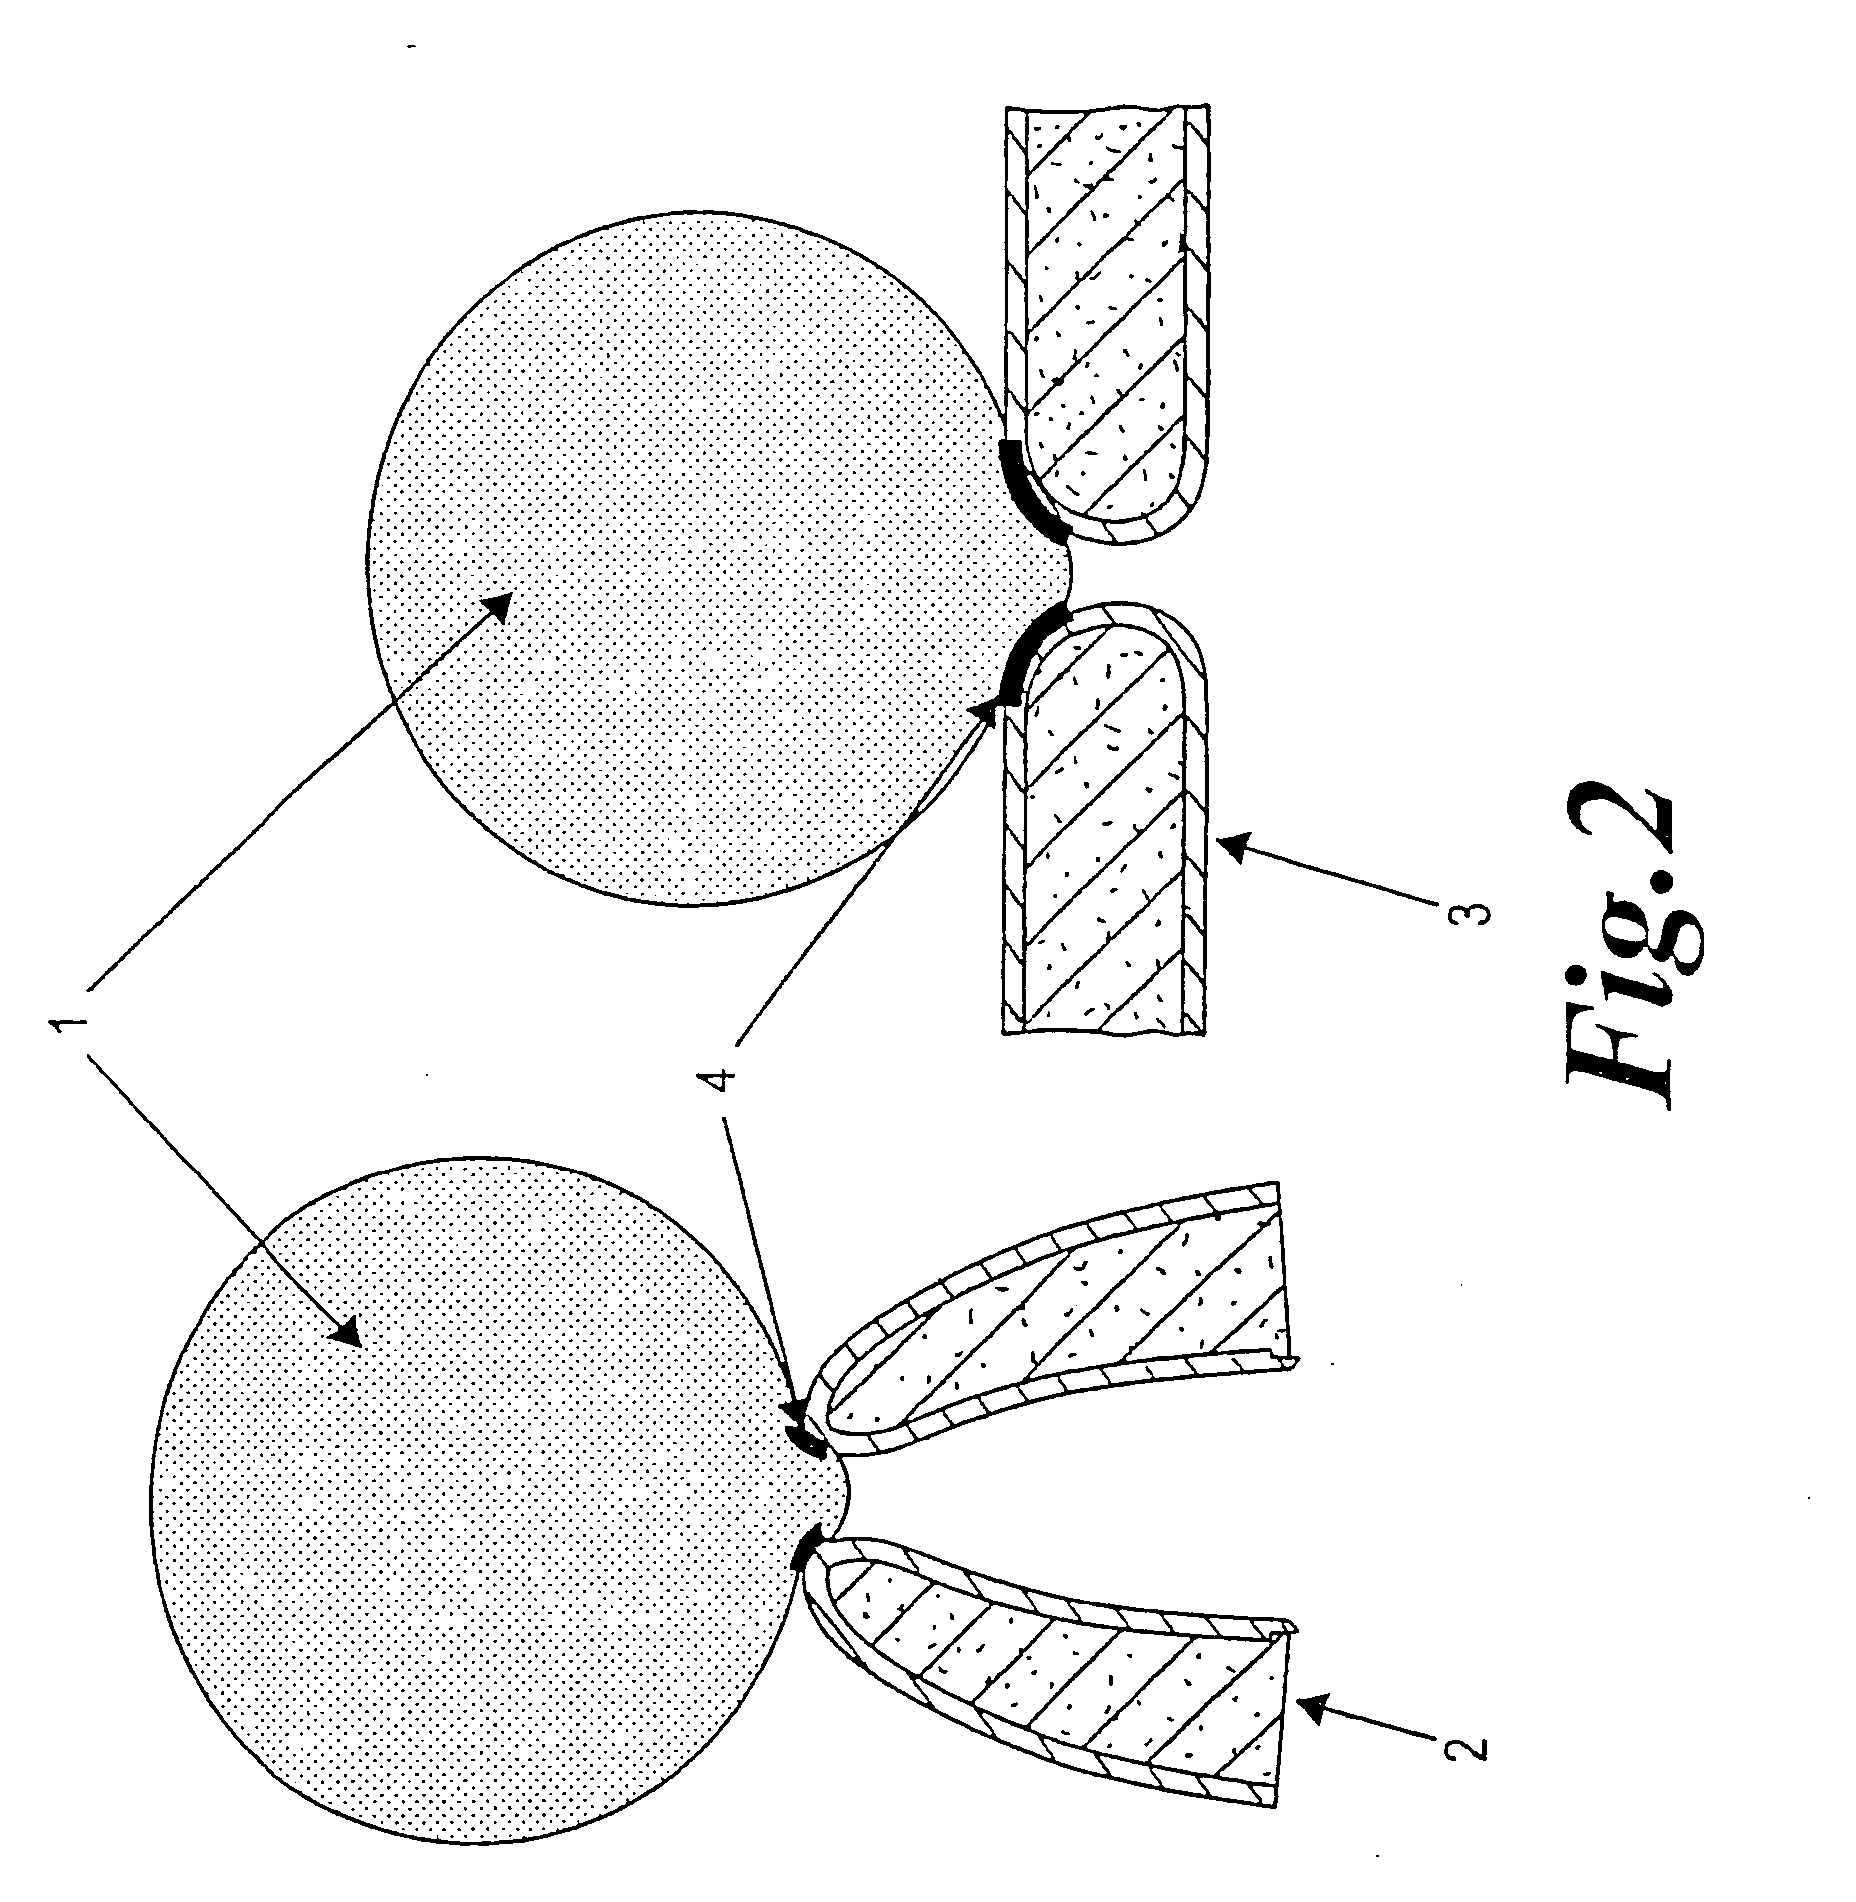 Substrate and method for measuring the electrophysiological properties of cell membranes